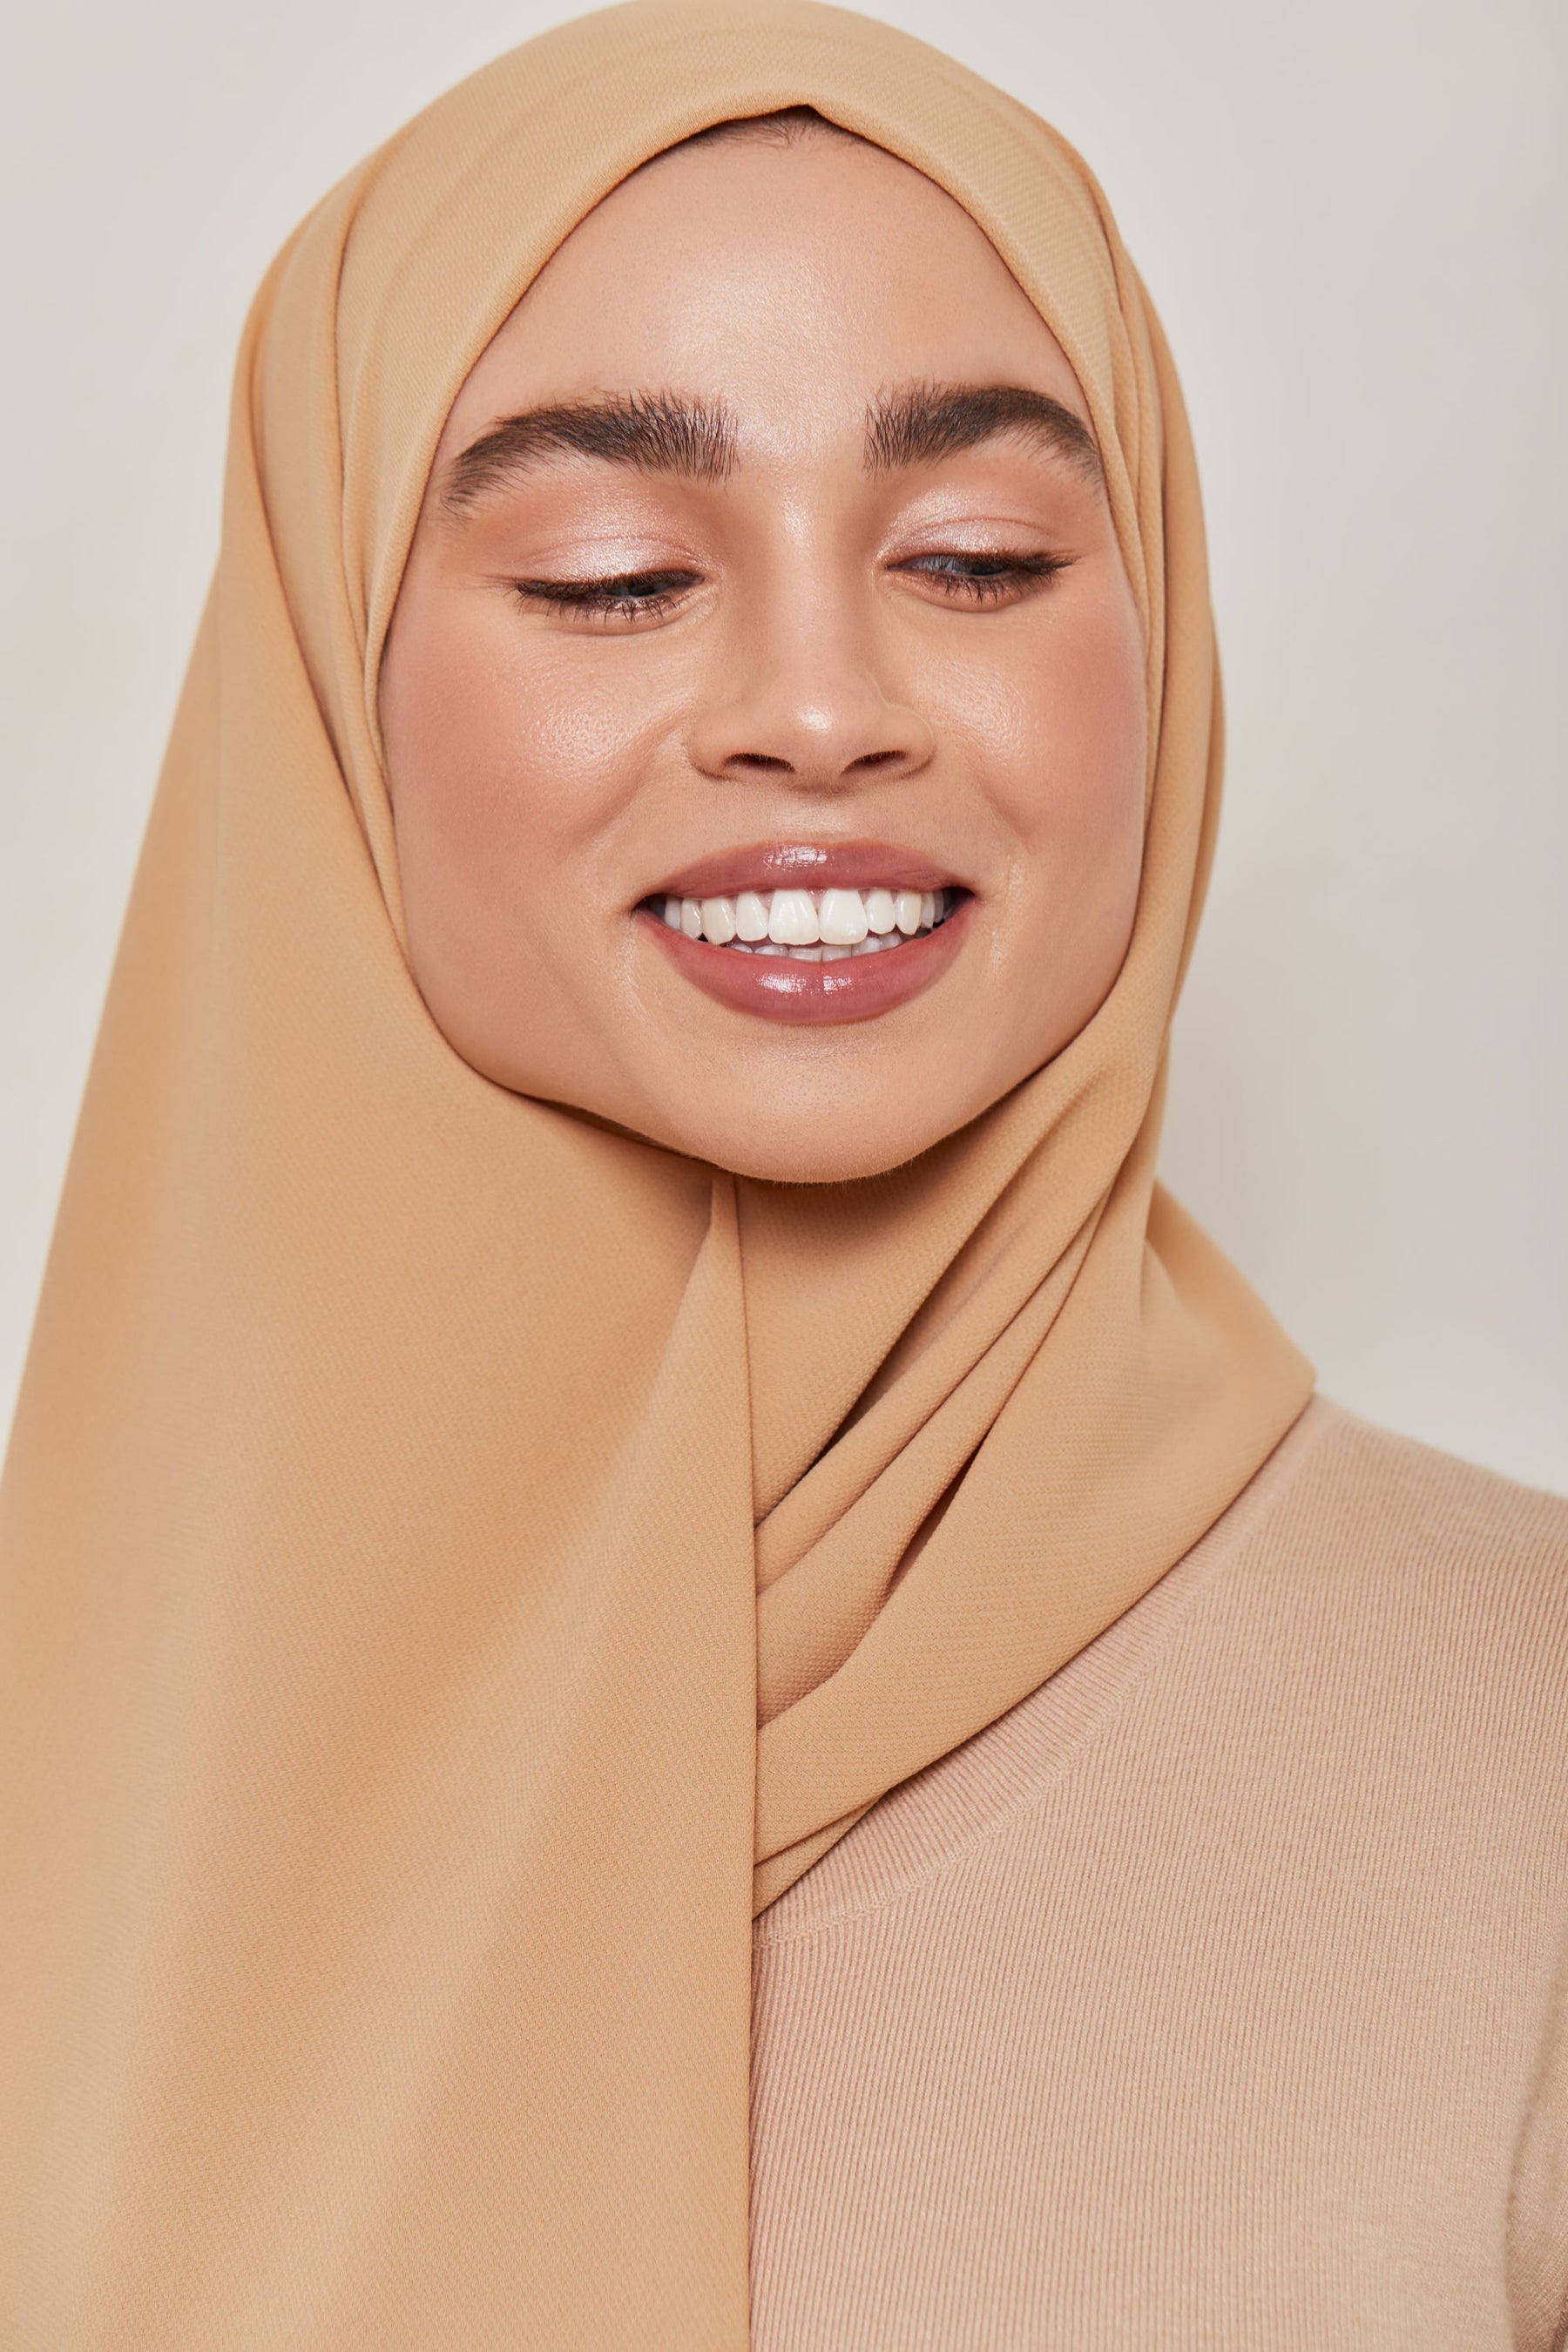 TEXTURE Twill Chiffon Hijab - Tanned Veiled Collection 